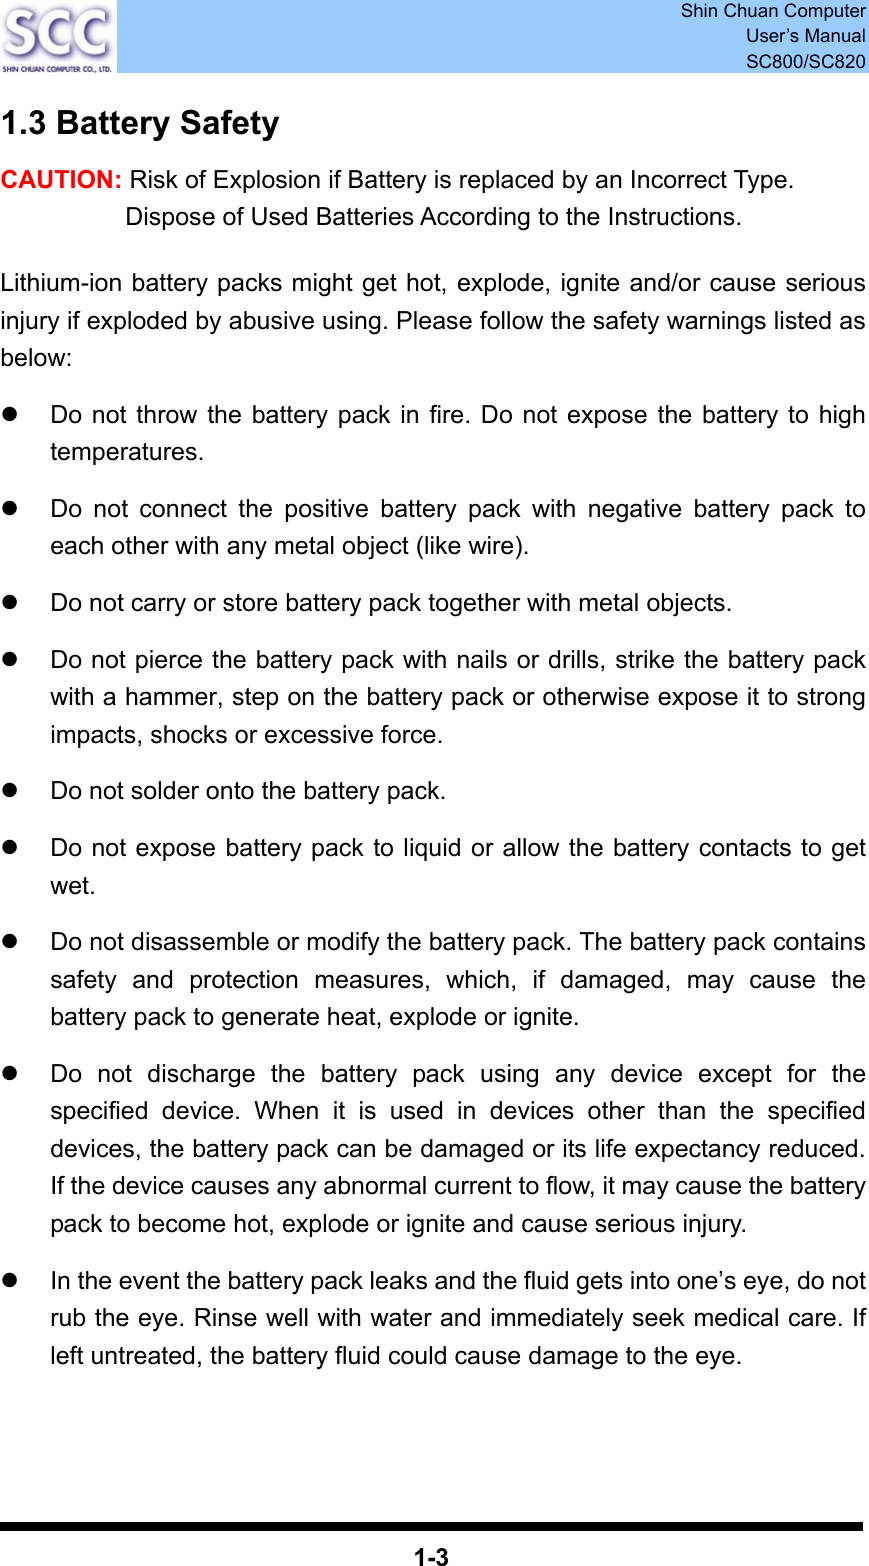  Shin Chuan Computer User’s Manual SC800/SC820  1-3 1.3 Battery Safety CAUTION: Risk of Explosion if Battery is replaced by an Incorrect Type. Dispose of Used Batteries According to the Instructions.  Lithium-ion battery packs might get hot, explode, ignite and/or cause serious injury if exploded by abusive using. Please follow the safety warnings listed as below:  z  Do not throw the battery pack in fire. Do not expose the battery to high temperatures.  z  Do not connect the positive battery pack with negative battery pack to each other with any metal object (like wire).  z  Do not carry or store battery pack together with metal objects.  z  Do not pierce the battery pack with nails or drills, strike the battery pack with a hammer, step on the battery pack or otherwise expose it to strong impacts, shocks or excessive force.  z  Do not solder onto the battery pack.  z  Do not expose battery pack to liquid or allow the battery contacts to get wet.  z  Do not disassemble or modify the battery pack. The battery pack contains safety and protection measures, which, if damaged, may cause the battery pack to generate heat, explode or ignite.  z  Do not discharge the battery pack using any device except for the specified device. When it is used in devices other than the specified devices, the battery pack can be damaged or its life expectancy reduced. If the device causes any abnormal current to flow, it may cause the battery pack to become hot, explode or ignite and cause serious injury.  z  In the event the battery pack leaks and the fluid gets into one’s eye, do not rub the eye. Rinse well with water and immediately seek medical care. If left untreated, the battery fluid could cause damage to the eye.     